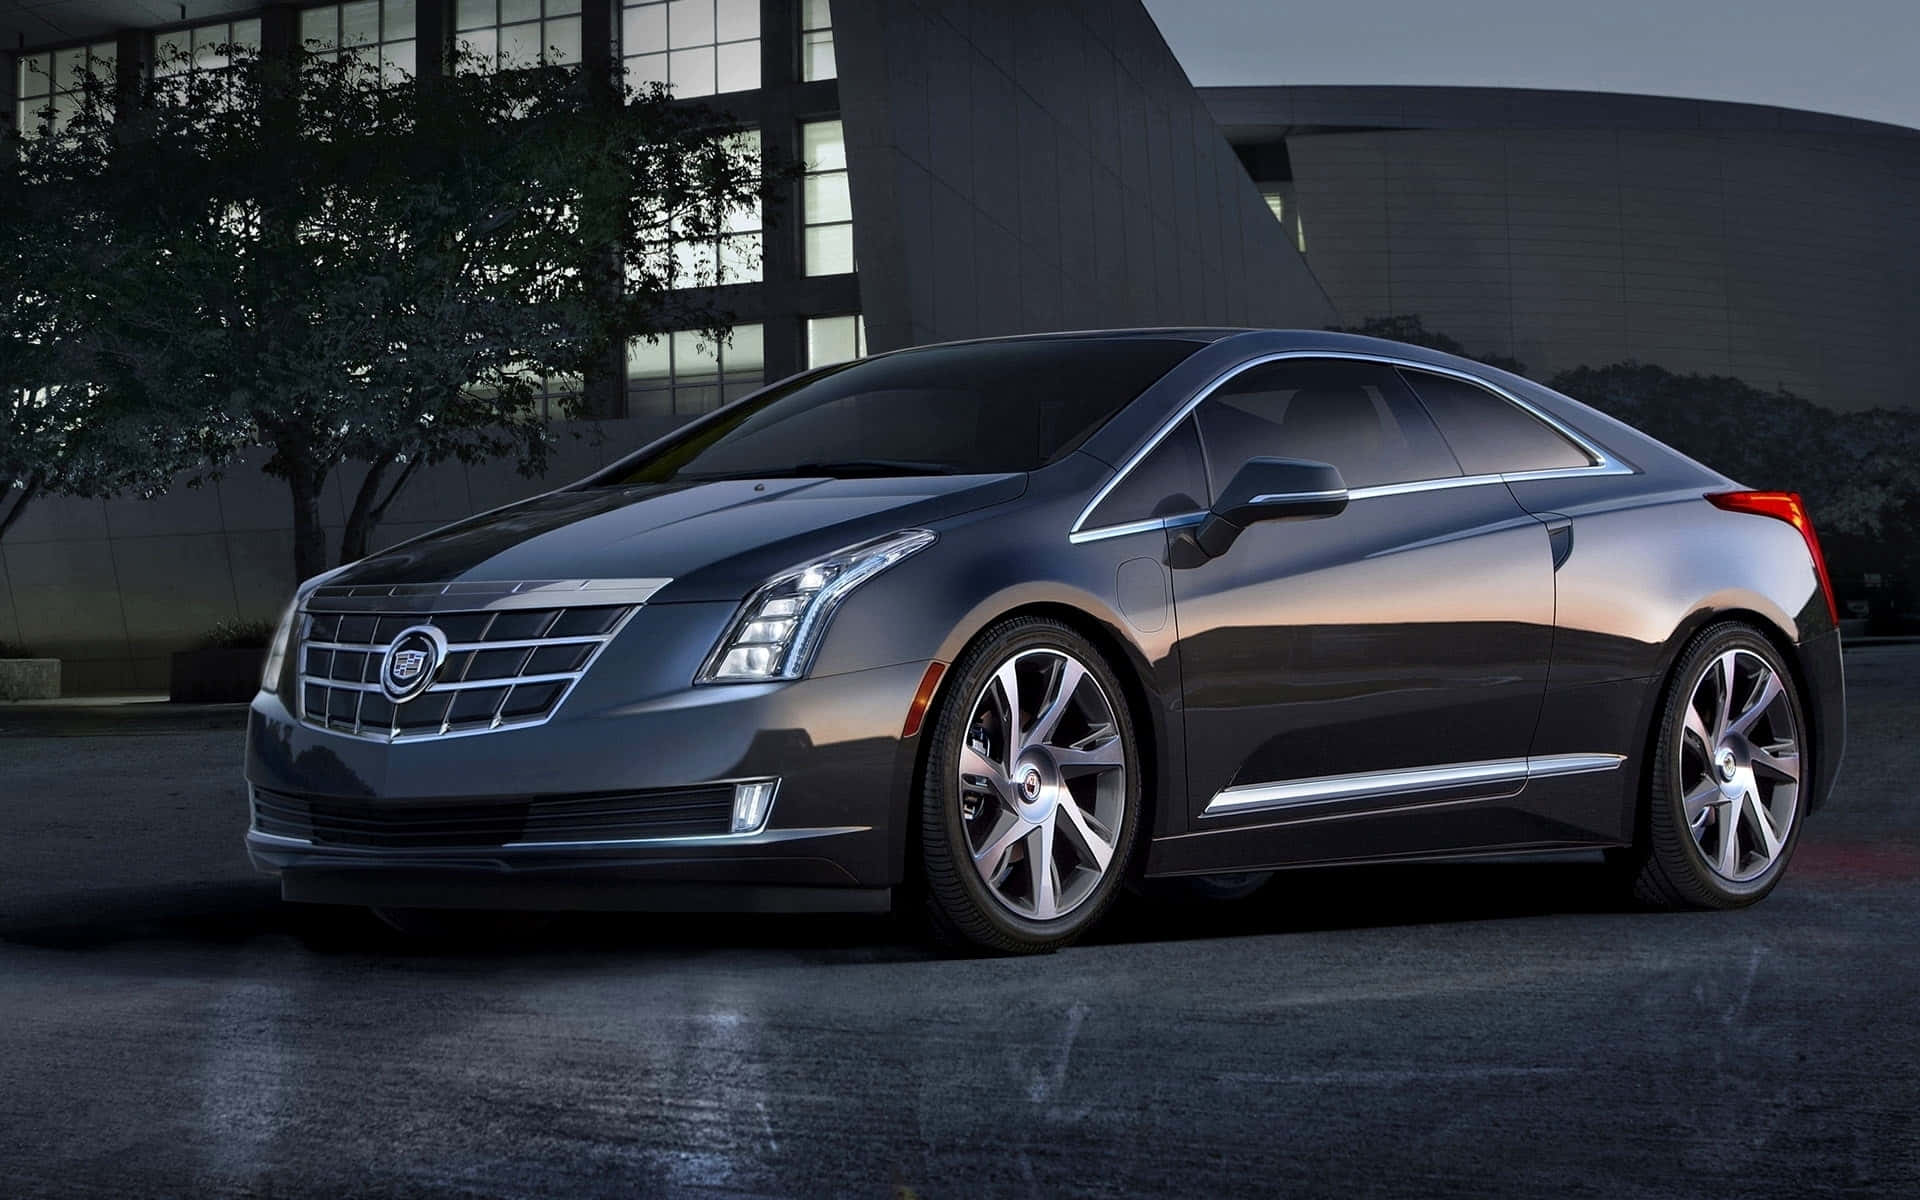 Stunning Cadillac ELR Electric Coupe on the Road Wallpaper